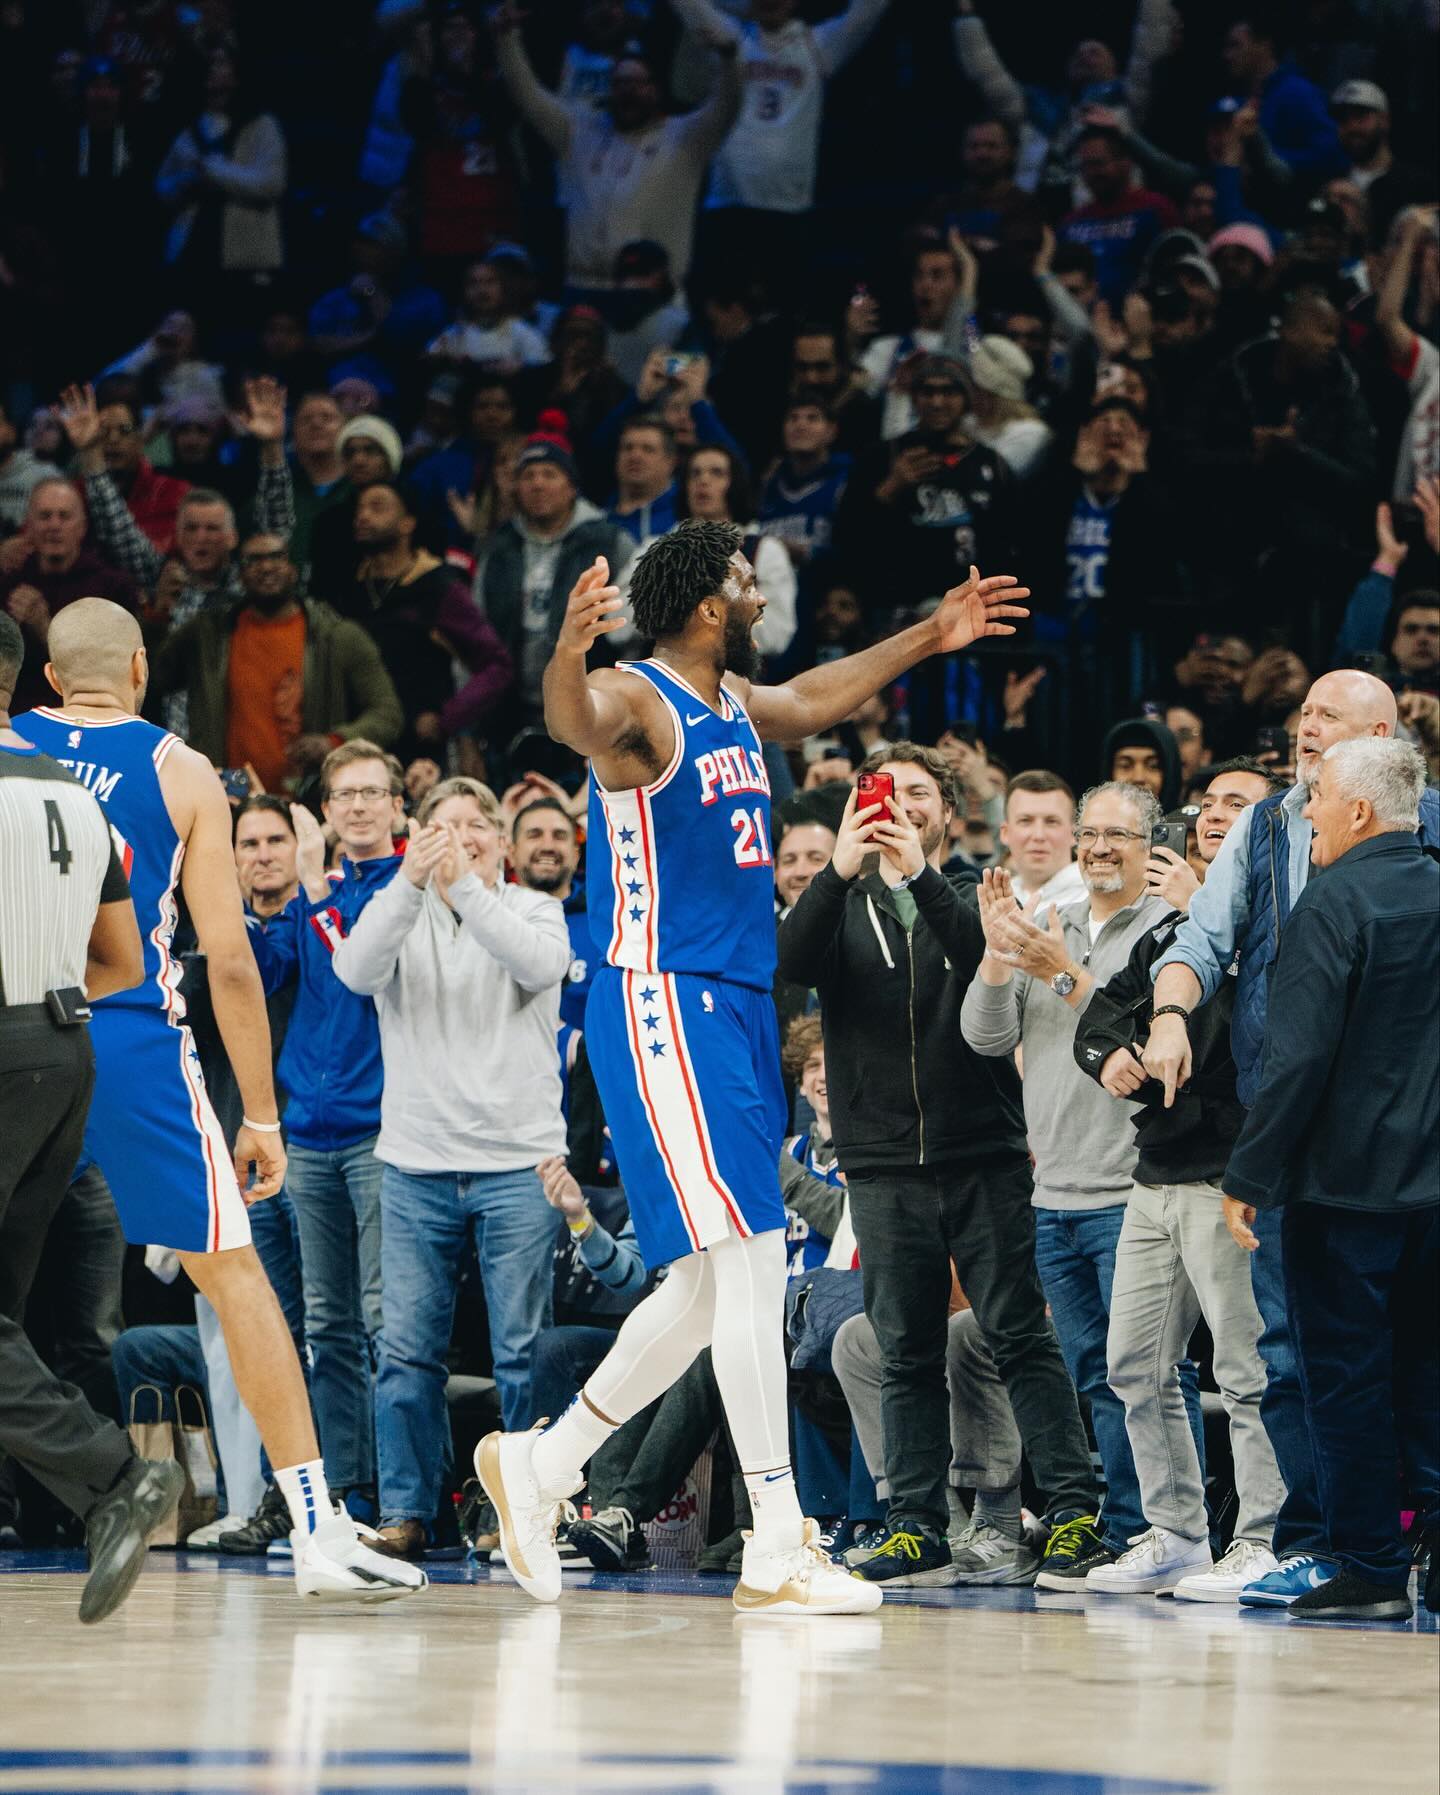 Joel Embiid Biography: Age, Net Worth, Height, Instagram, Wiki, Parents, Spouse, Siblings, Awards, Current Team